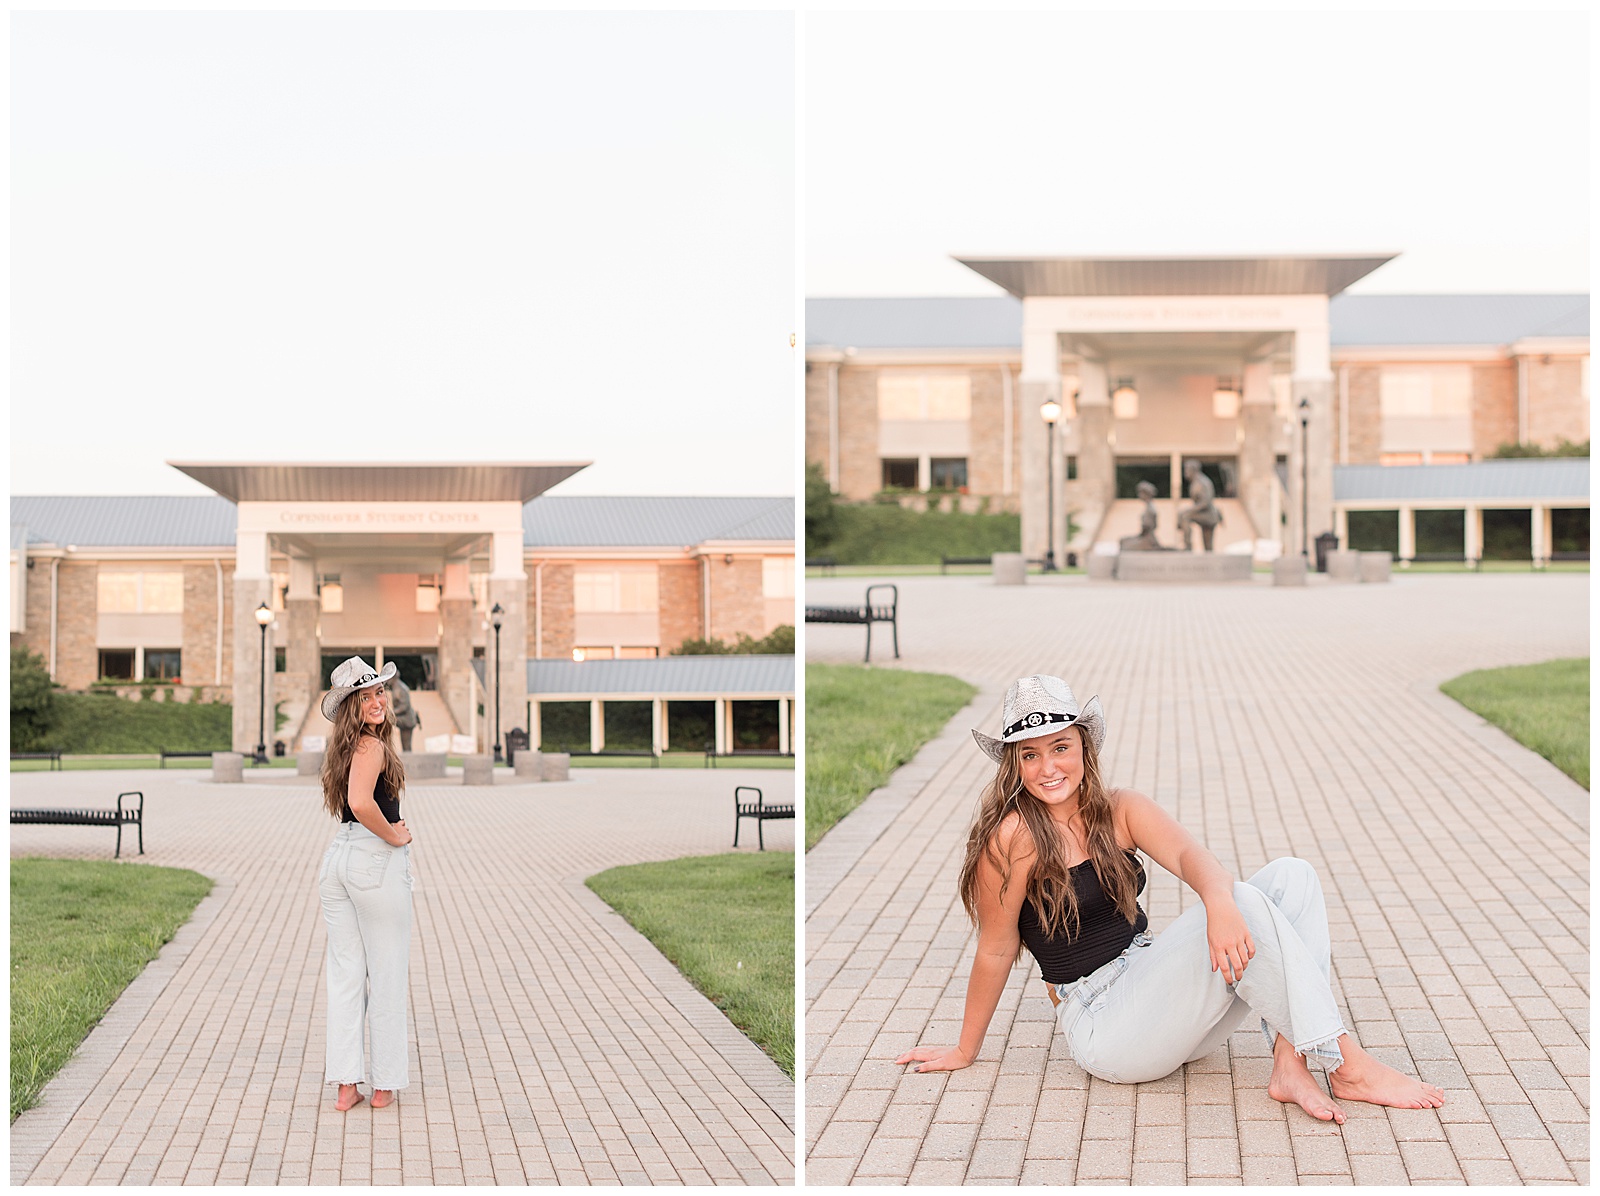 senior girl sitting on brick walkway wearing white cowboy hat on sunny summer evening with buildings behind her